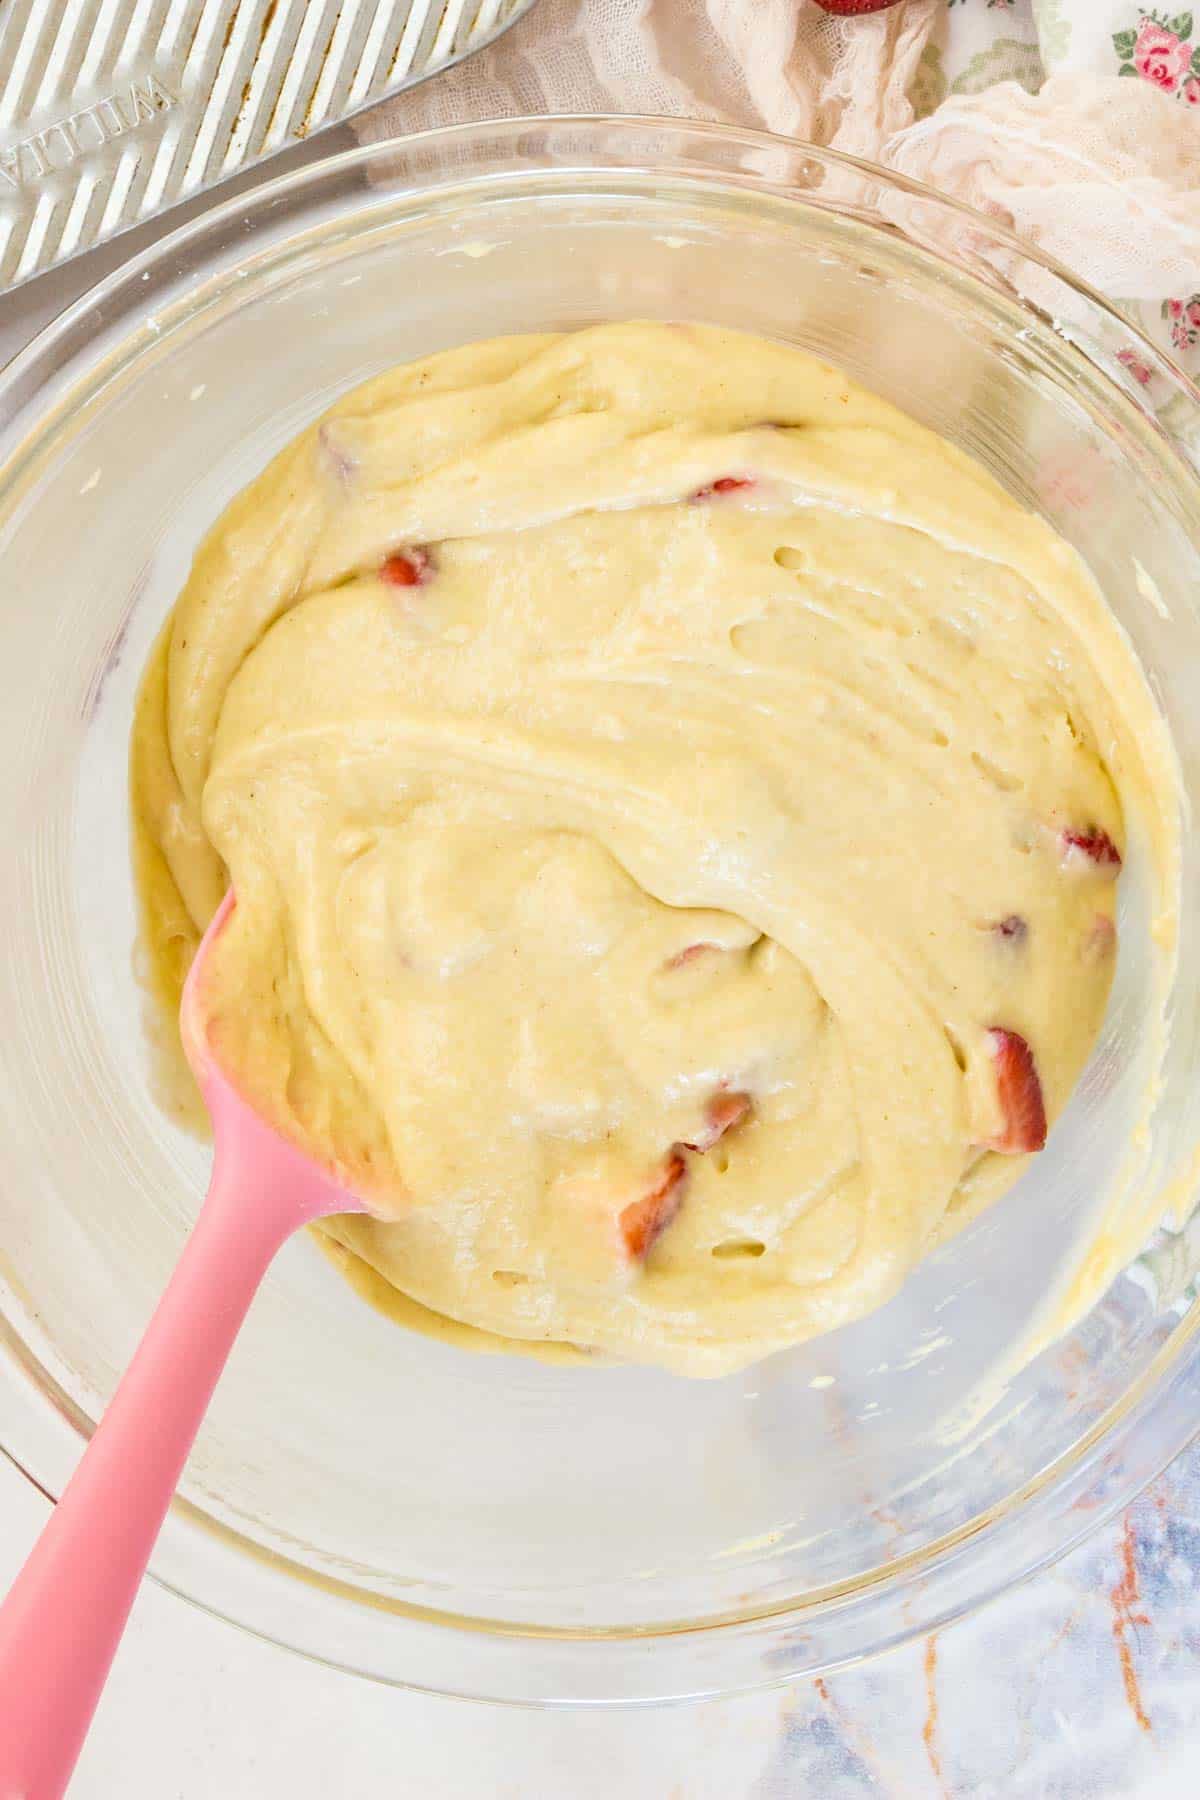 Strawberries are stirred into the muffin batter with a pink spoon.